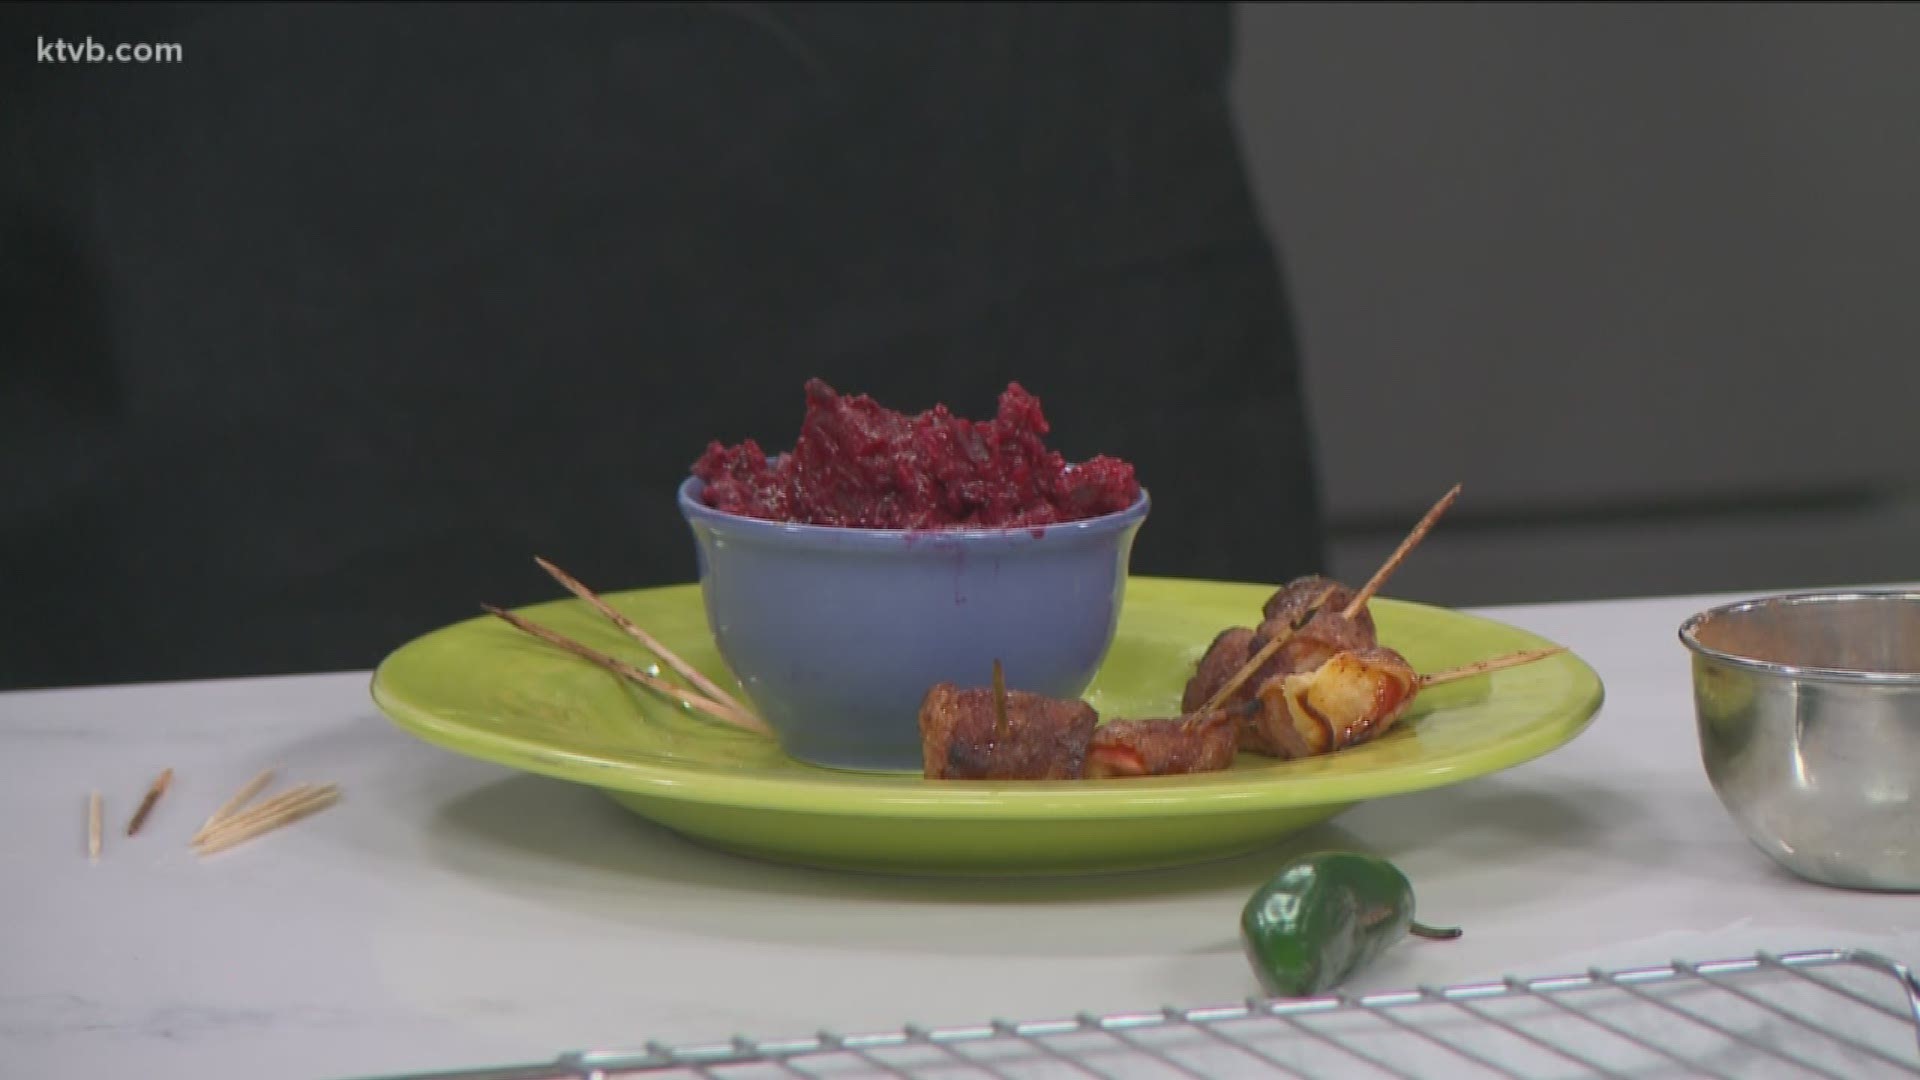 Chef Mac from Pat Mac's Catering shows how to make a holiday appetizer.